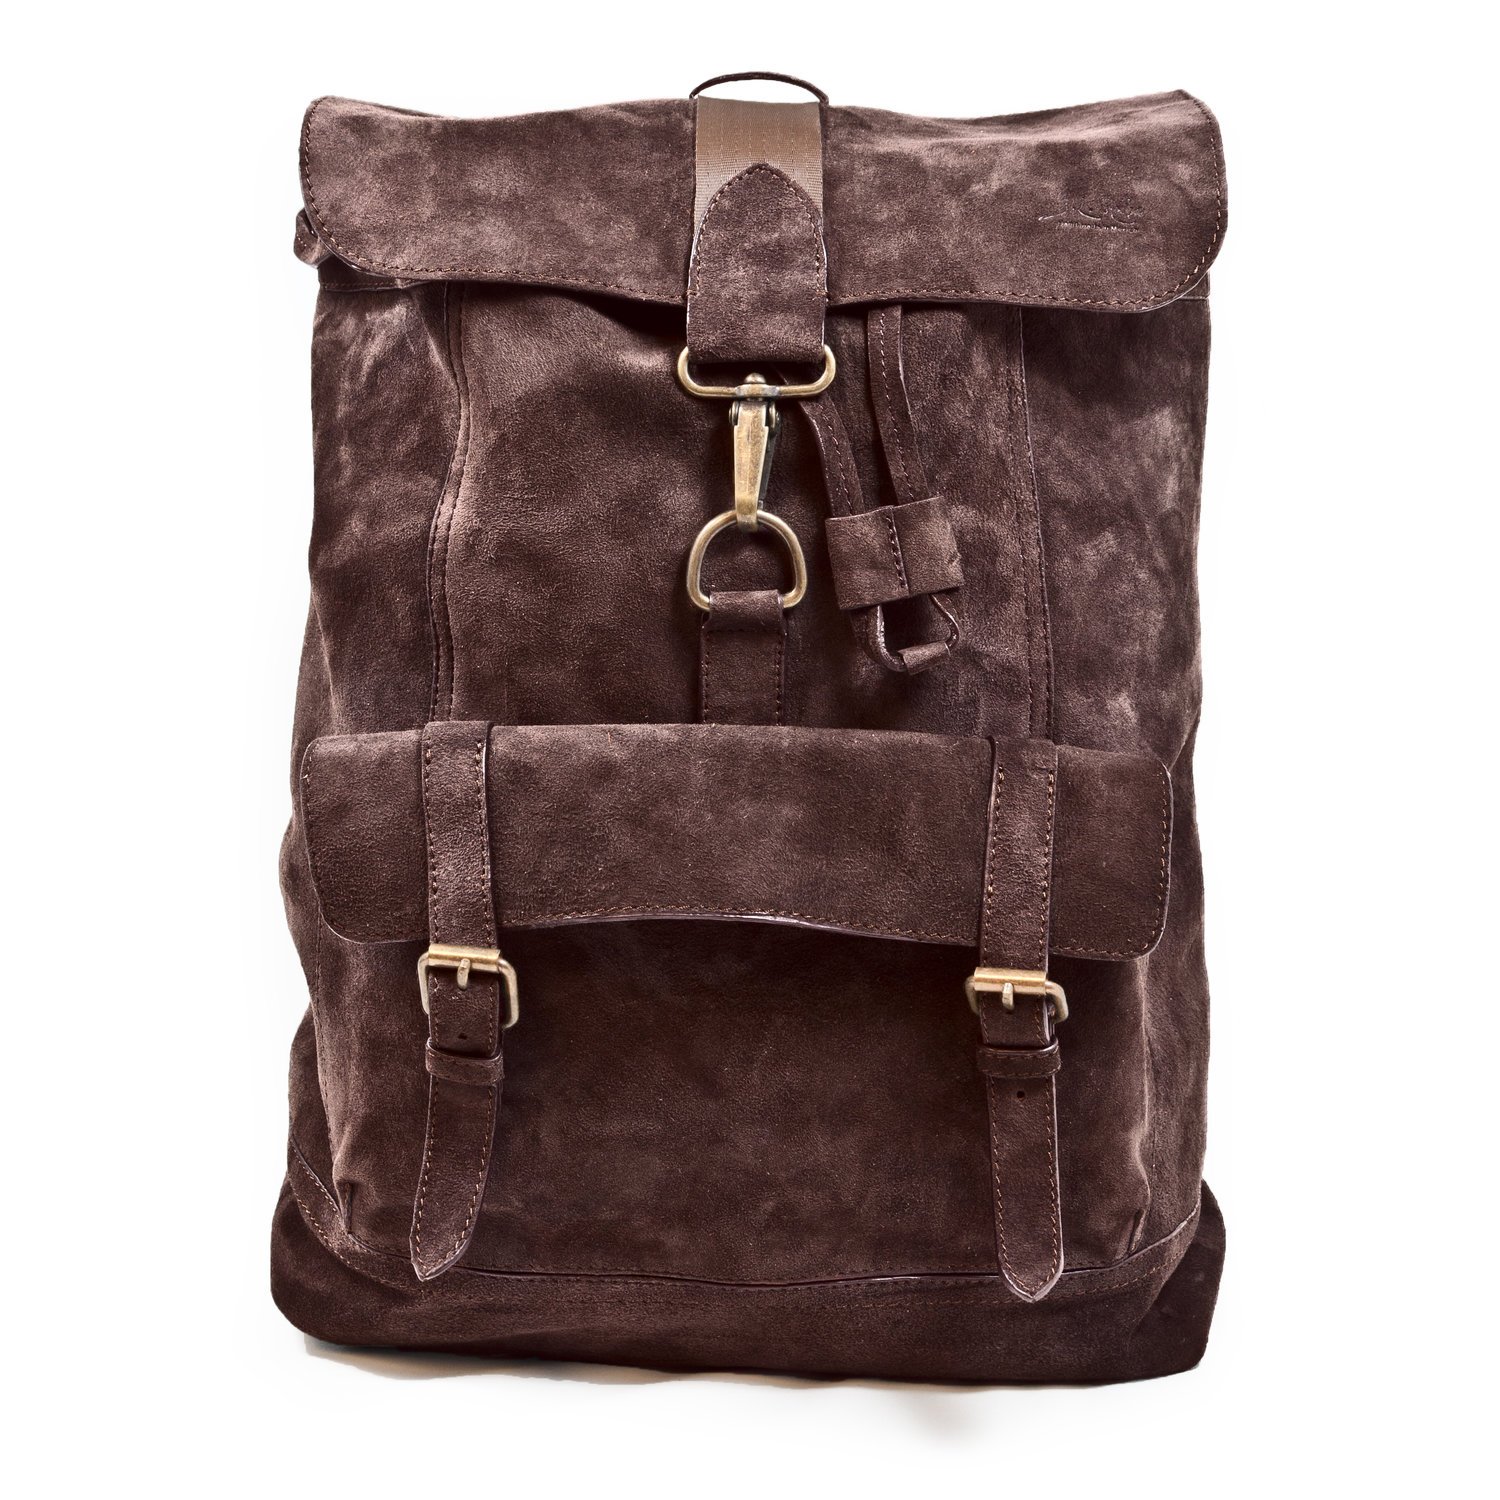 Artisan Backpack in Cocoa